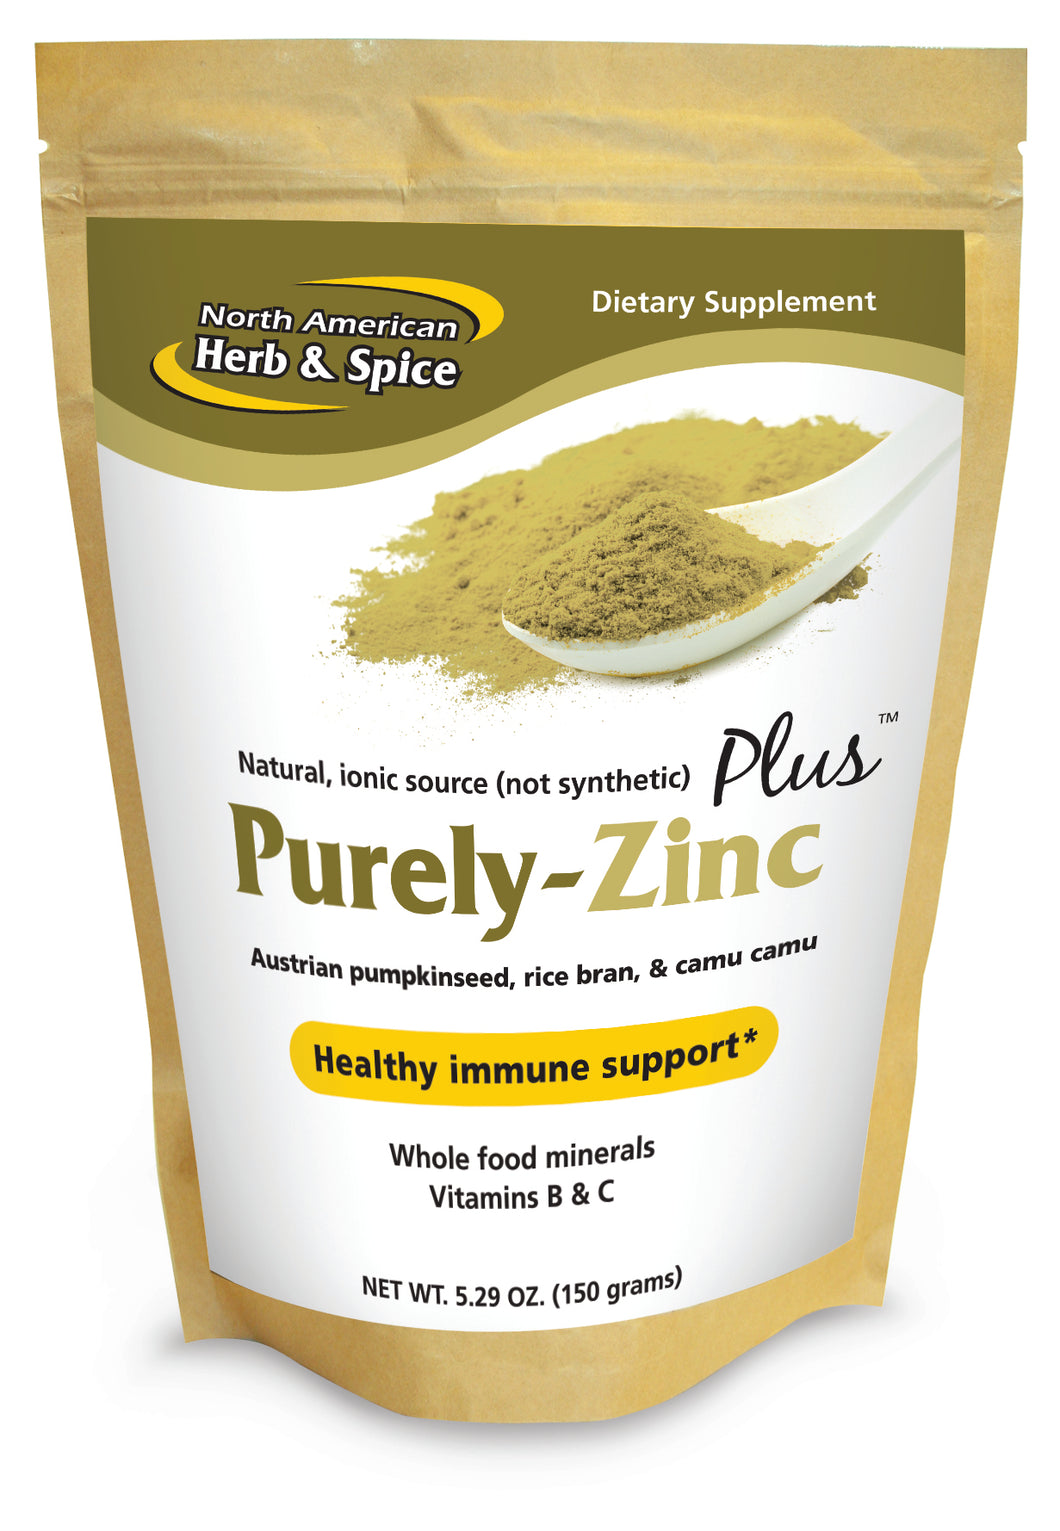 North American Herb and Spice Purely-Zinc